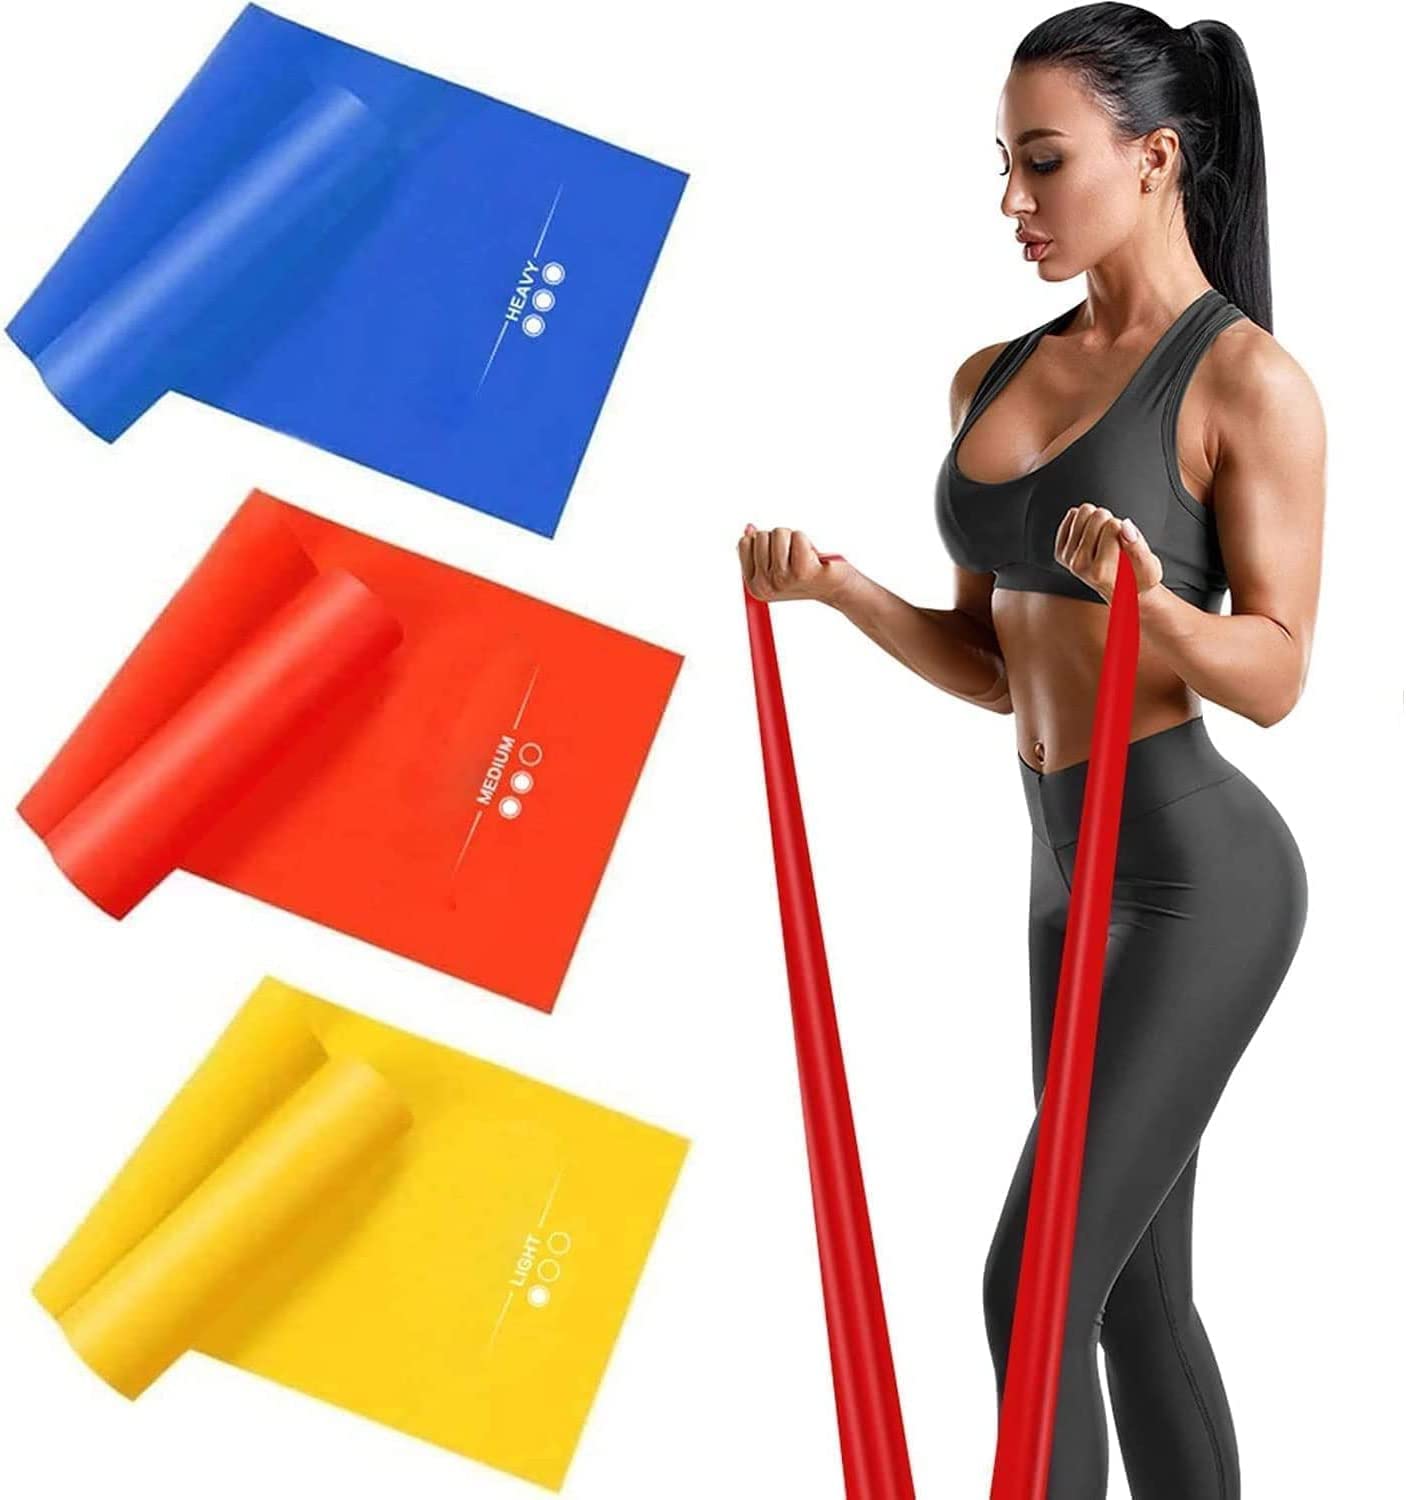 Haquno 3 Pack Exercise Resistance Bands with 3 Resistance Levels;1.8M Exercise Bands for Women and Men. Ideal for Strength Training, Yoga, Pilates